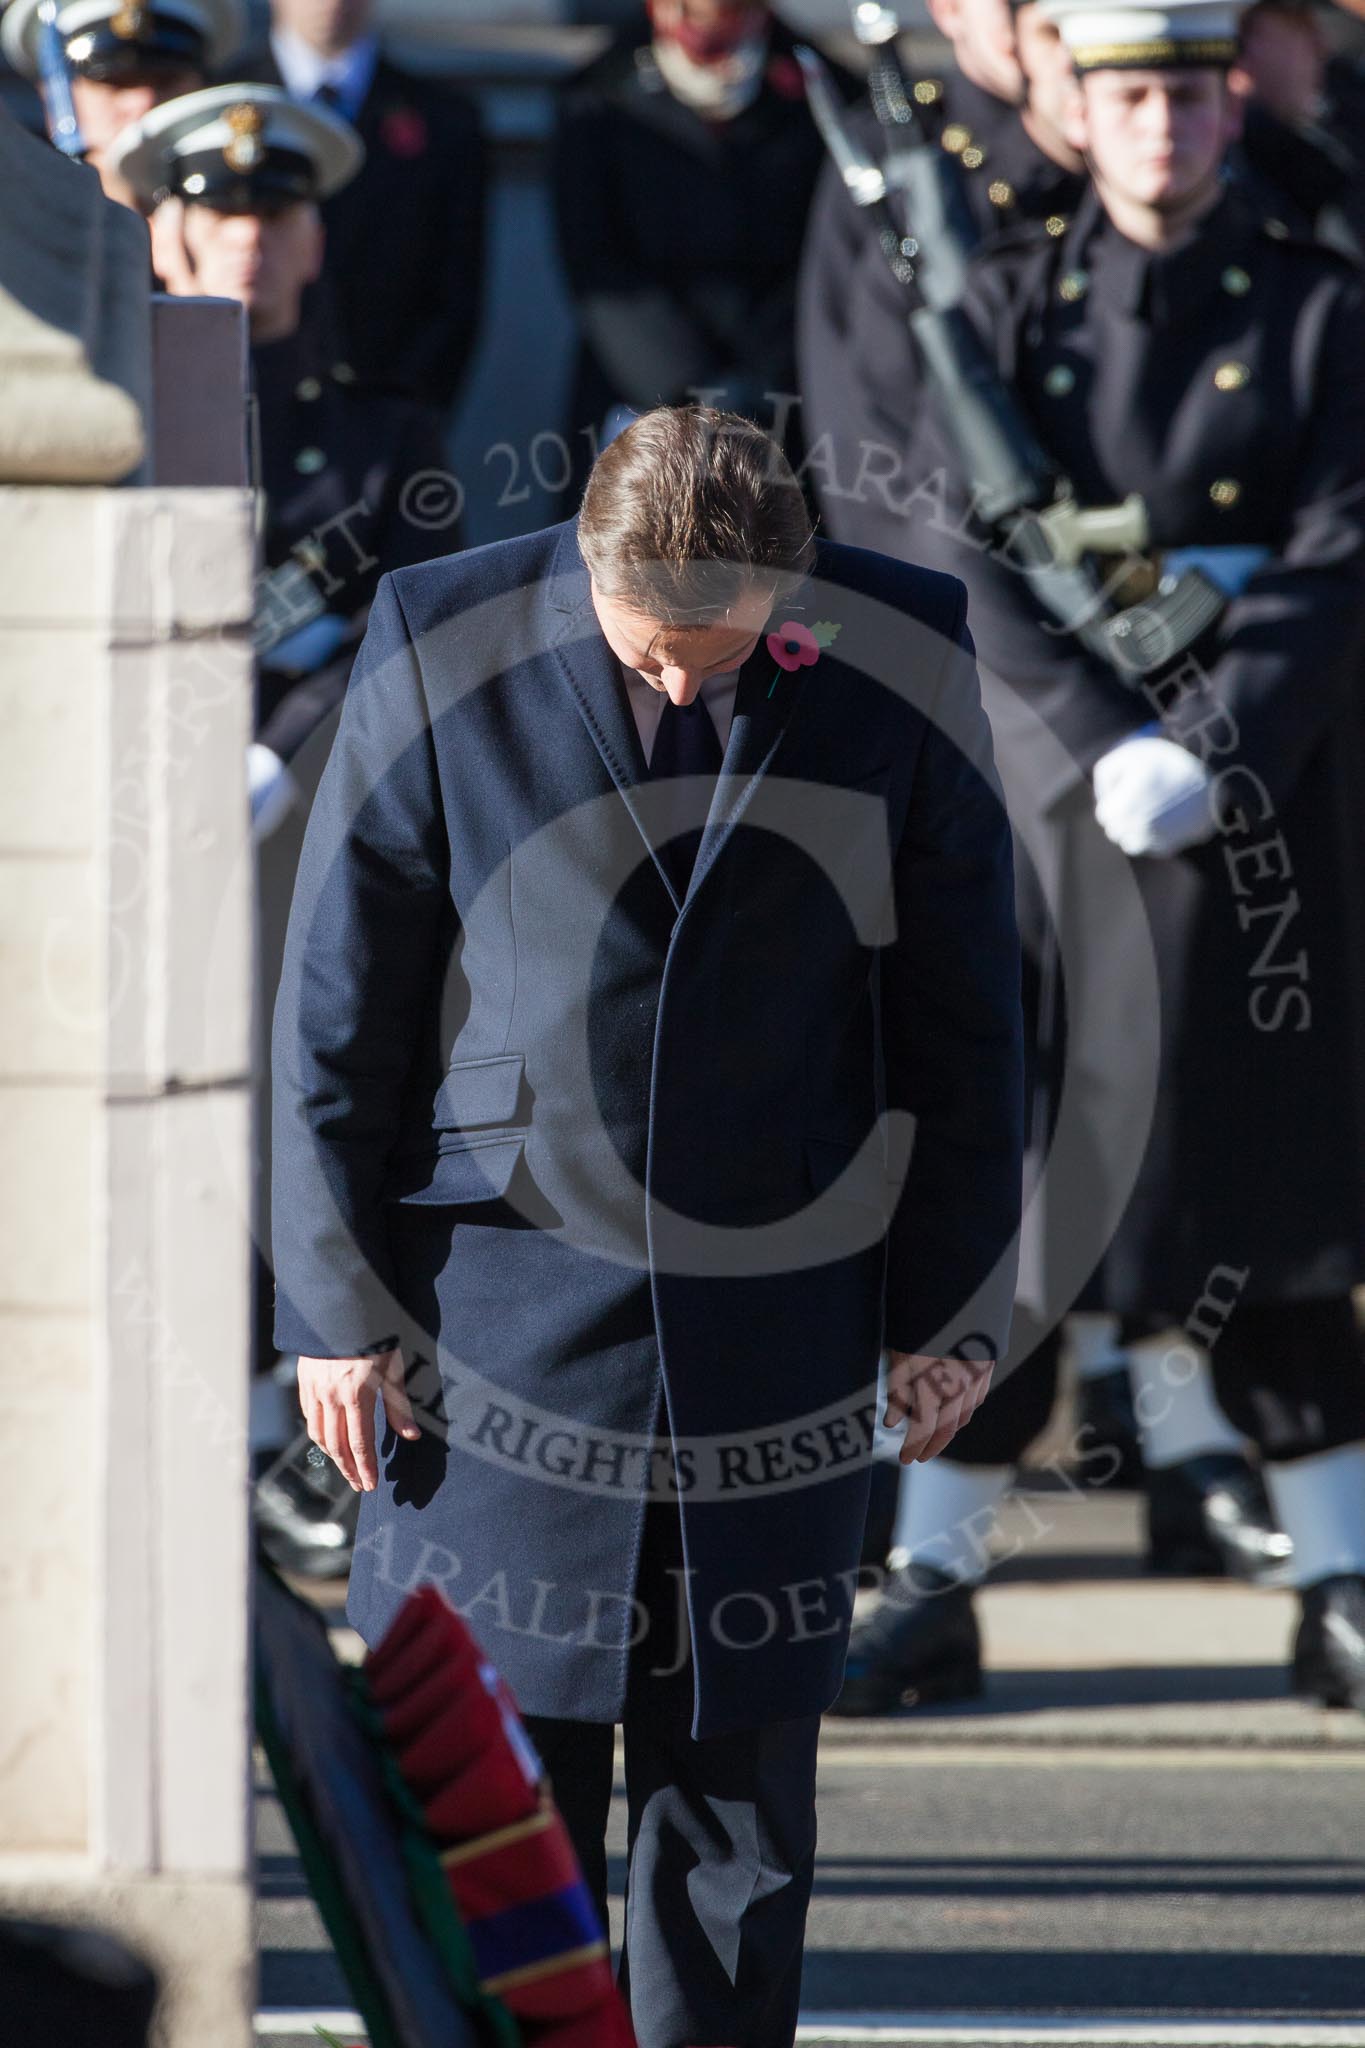 The Prime Minister, David Cameron, bowing in respect after having laid a wreath at the Cenotaph.